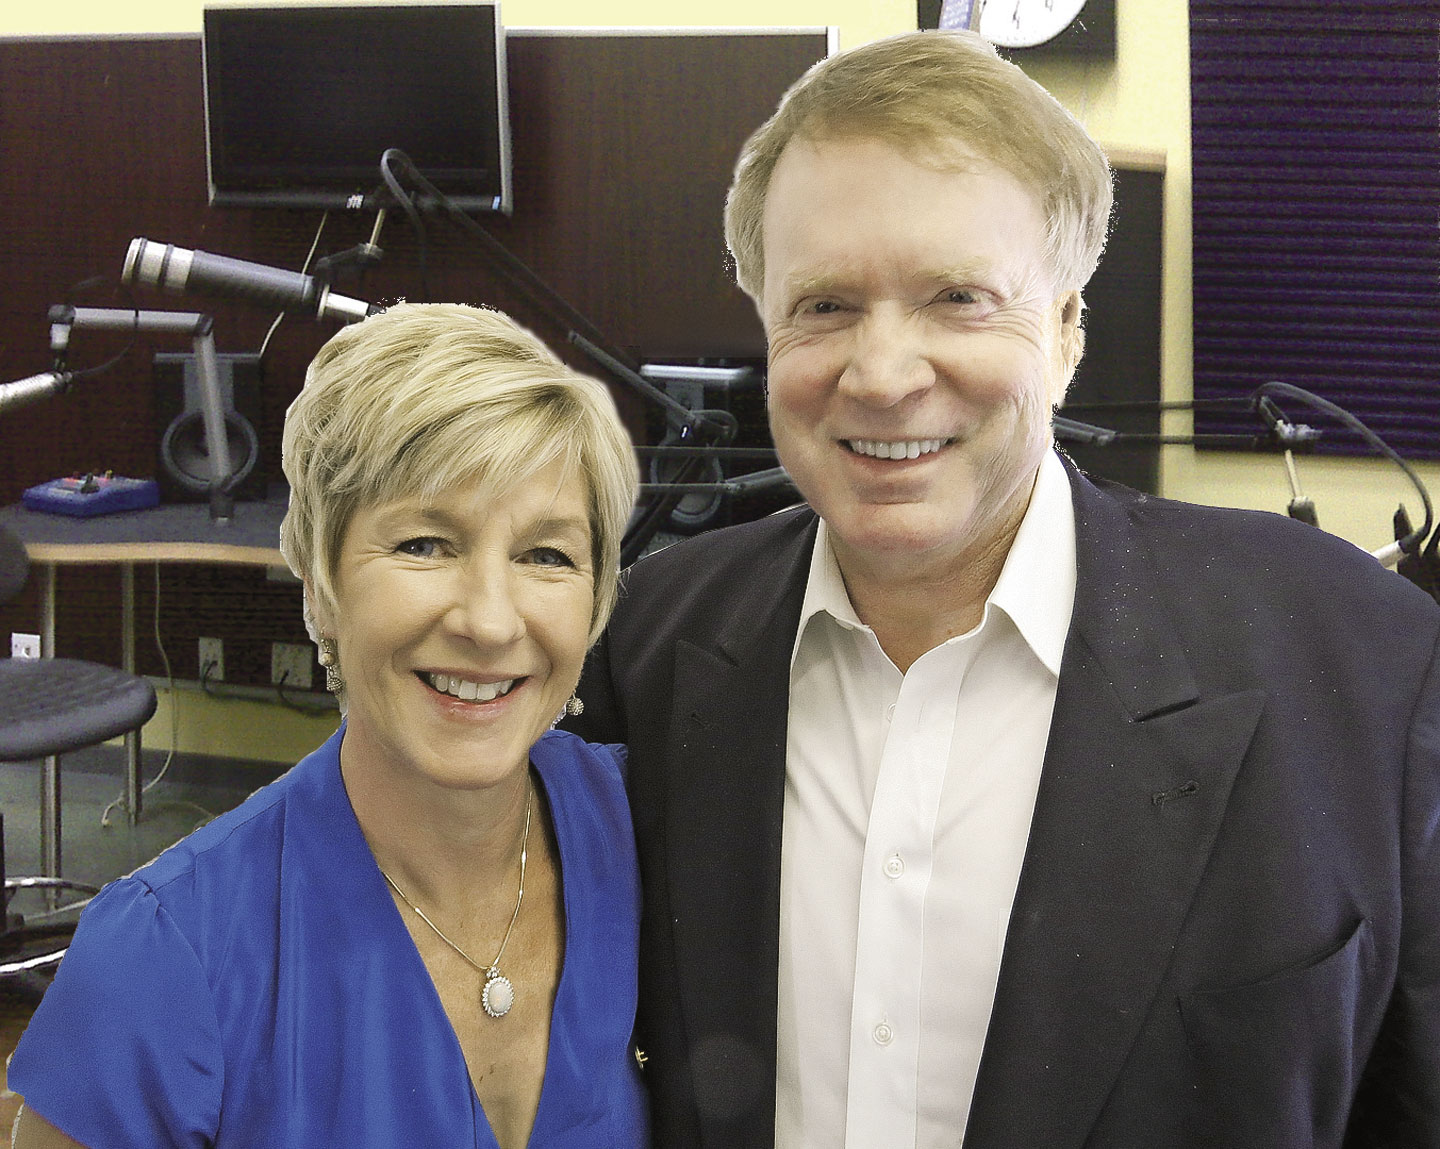 The Chuck And Julie Radio Show Triumphantly Returns